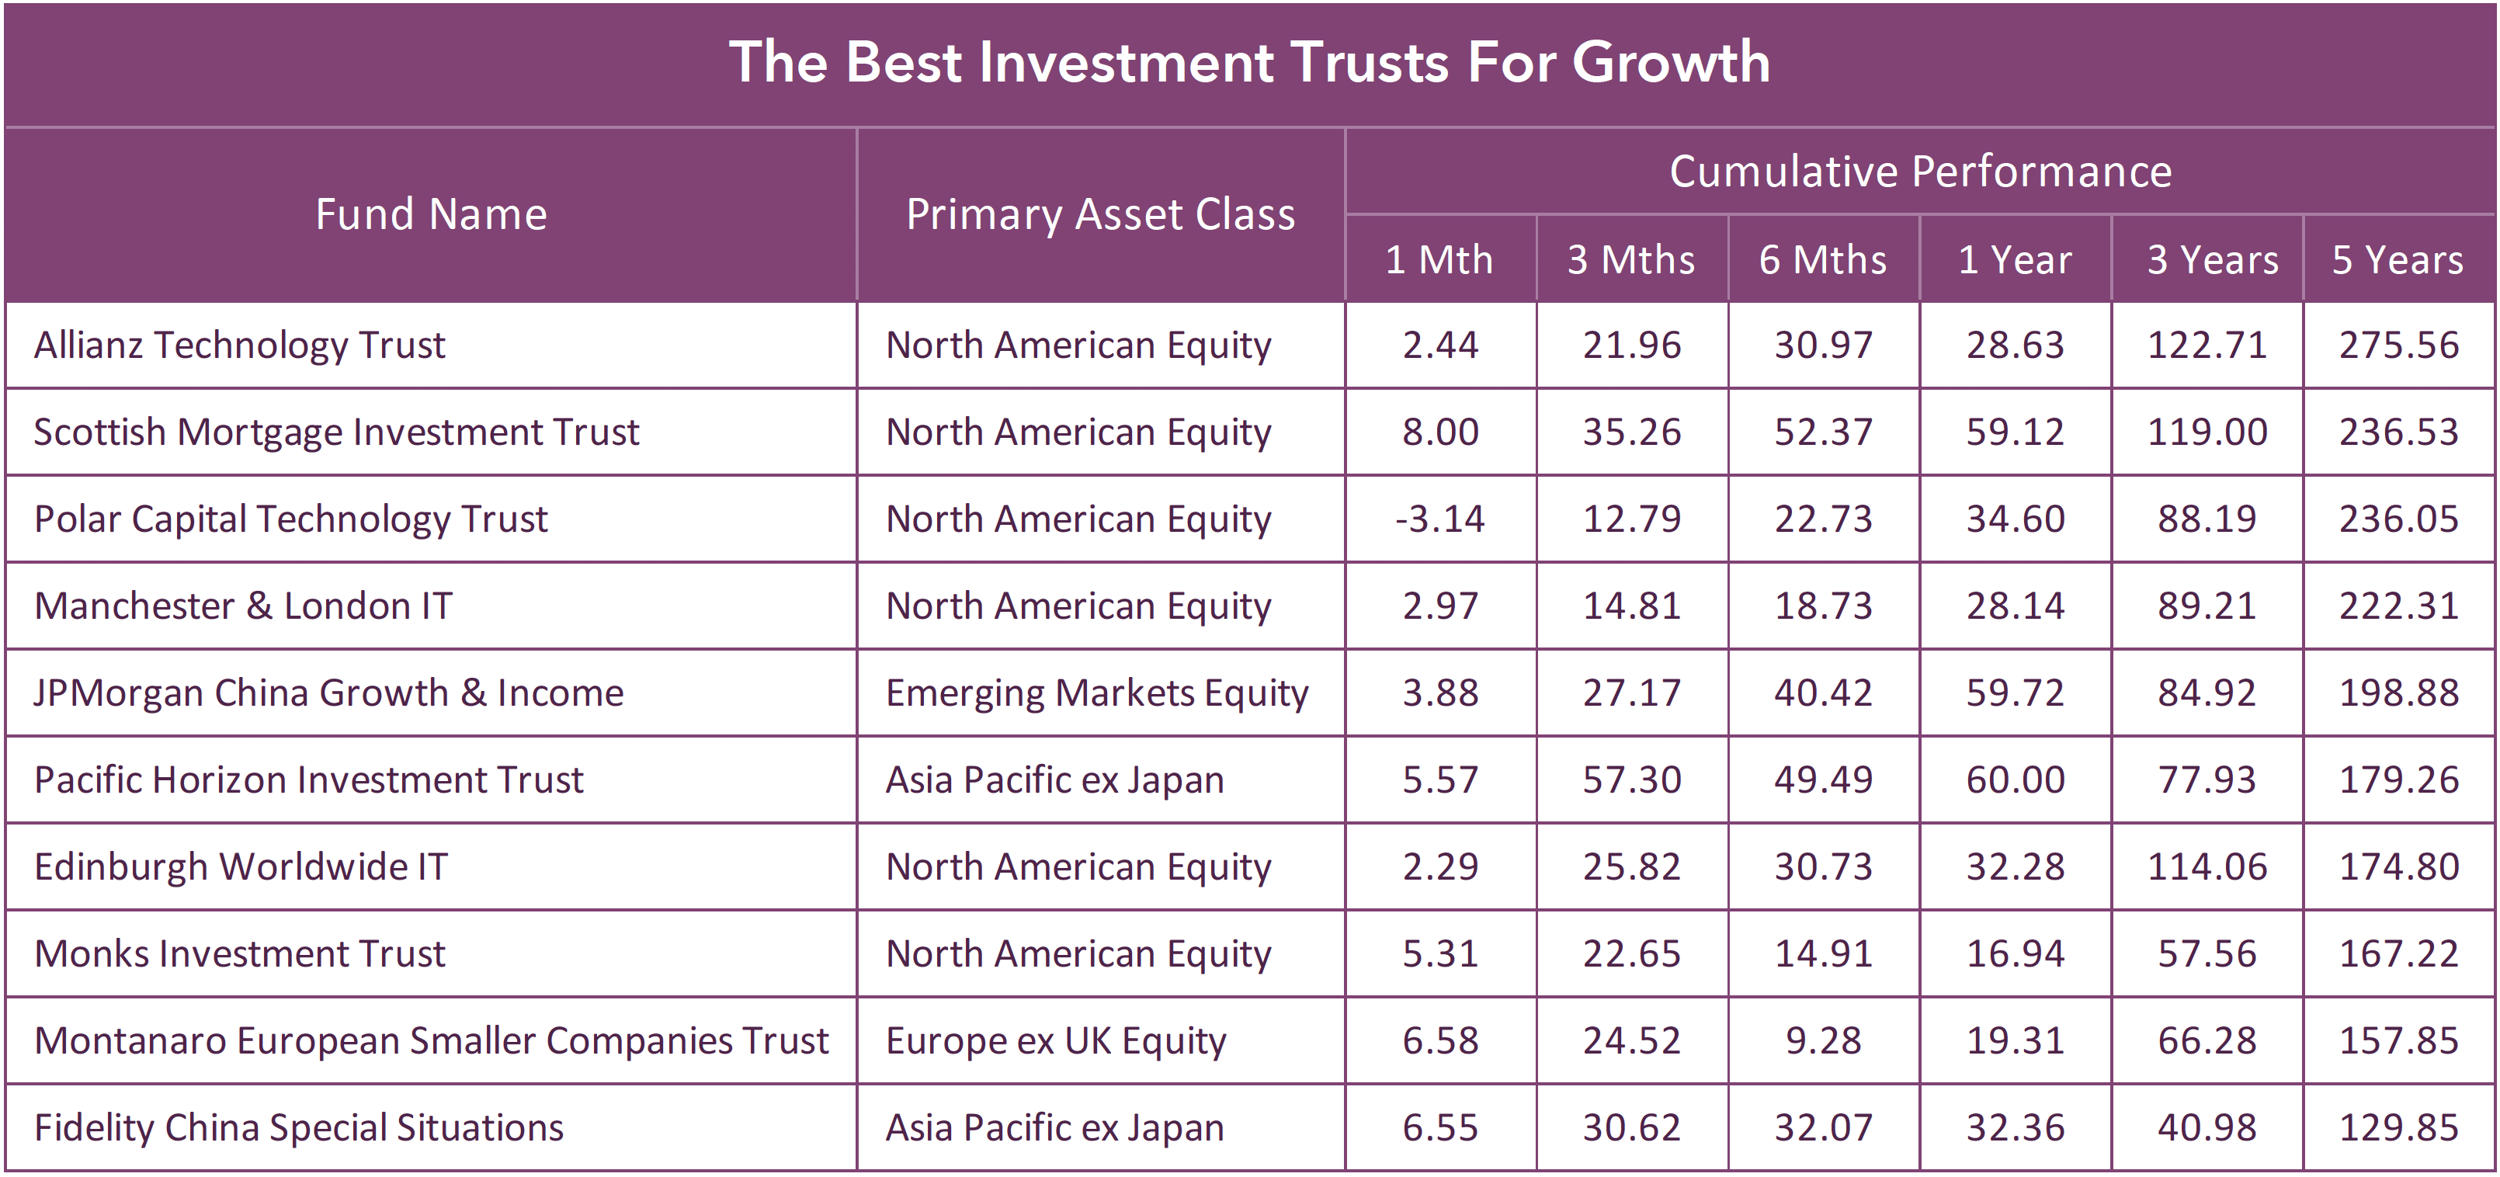 The Best Investment Trusts For Growth